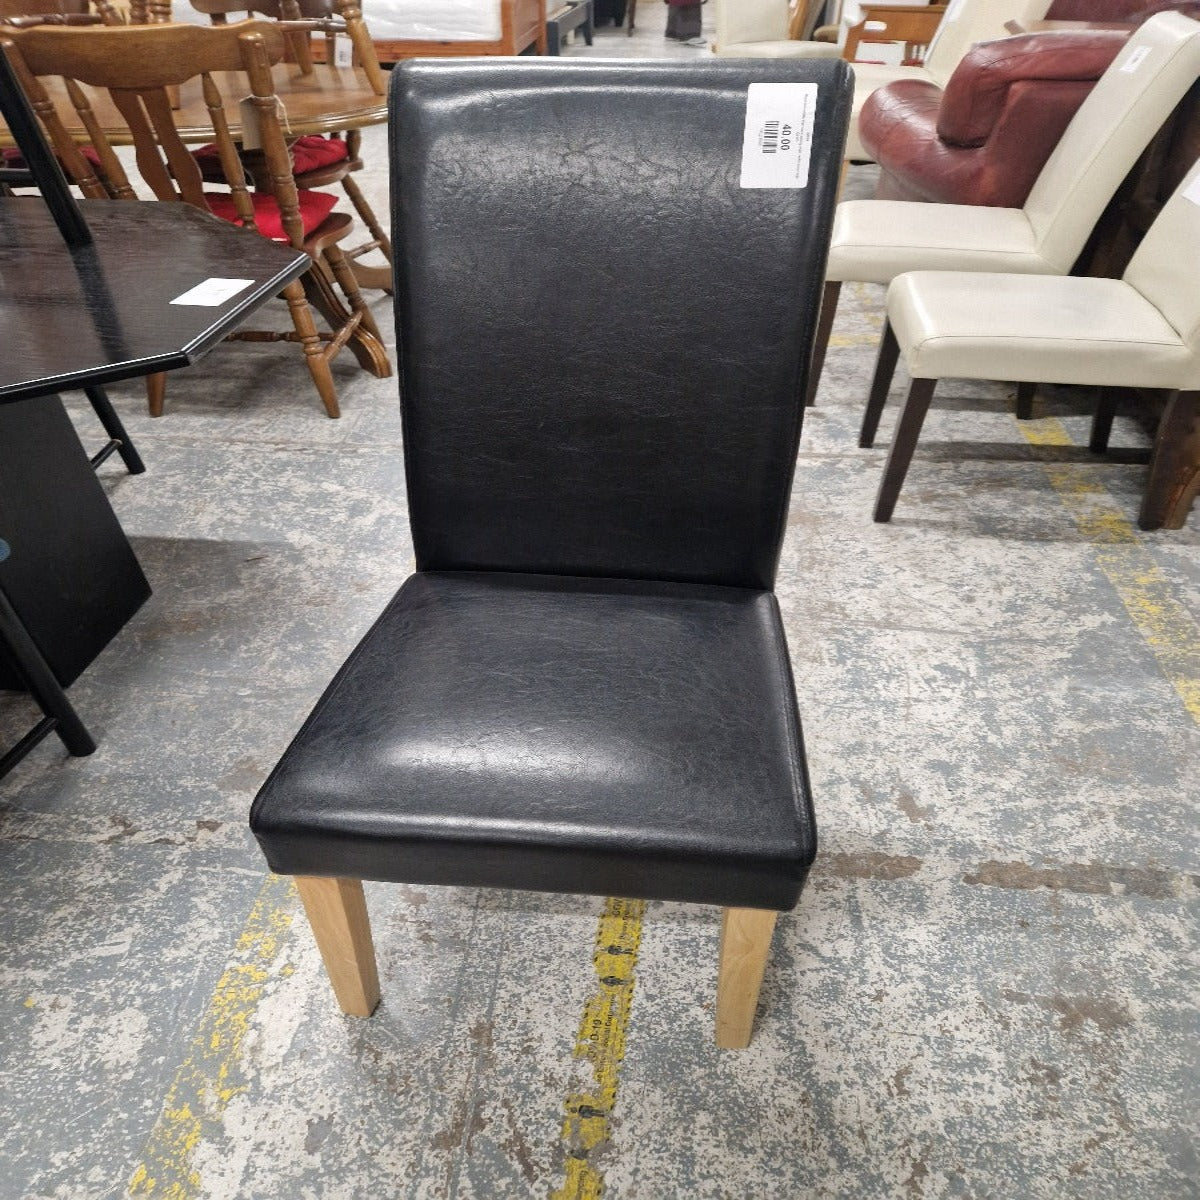 Black leatherette high back dining chair, solid wood legs Q3123